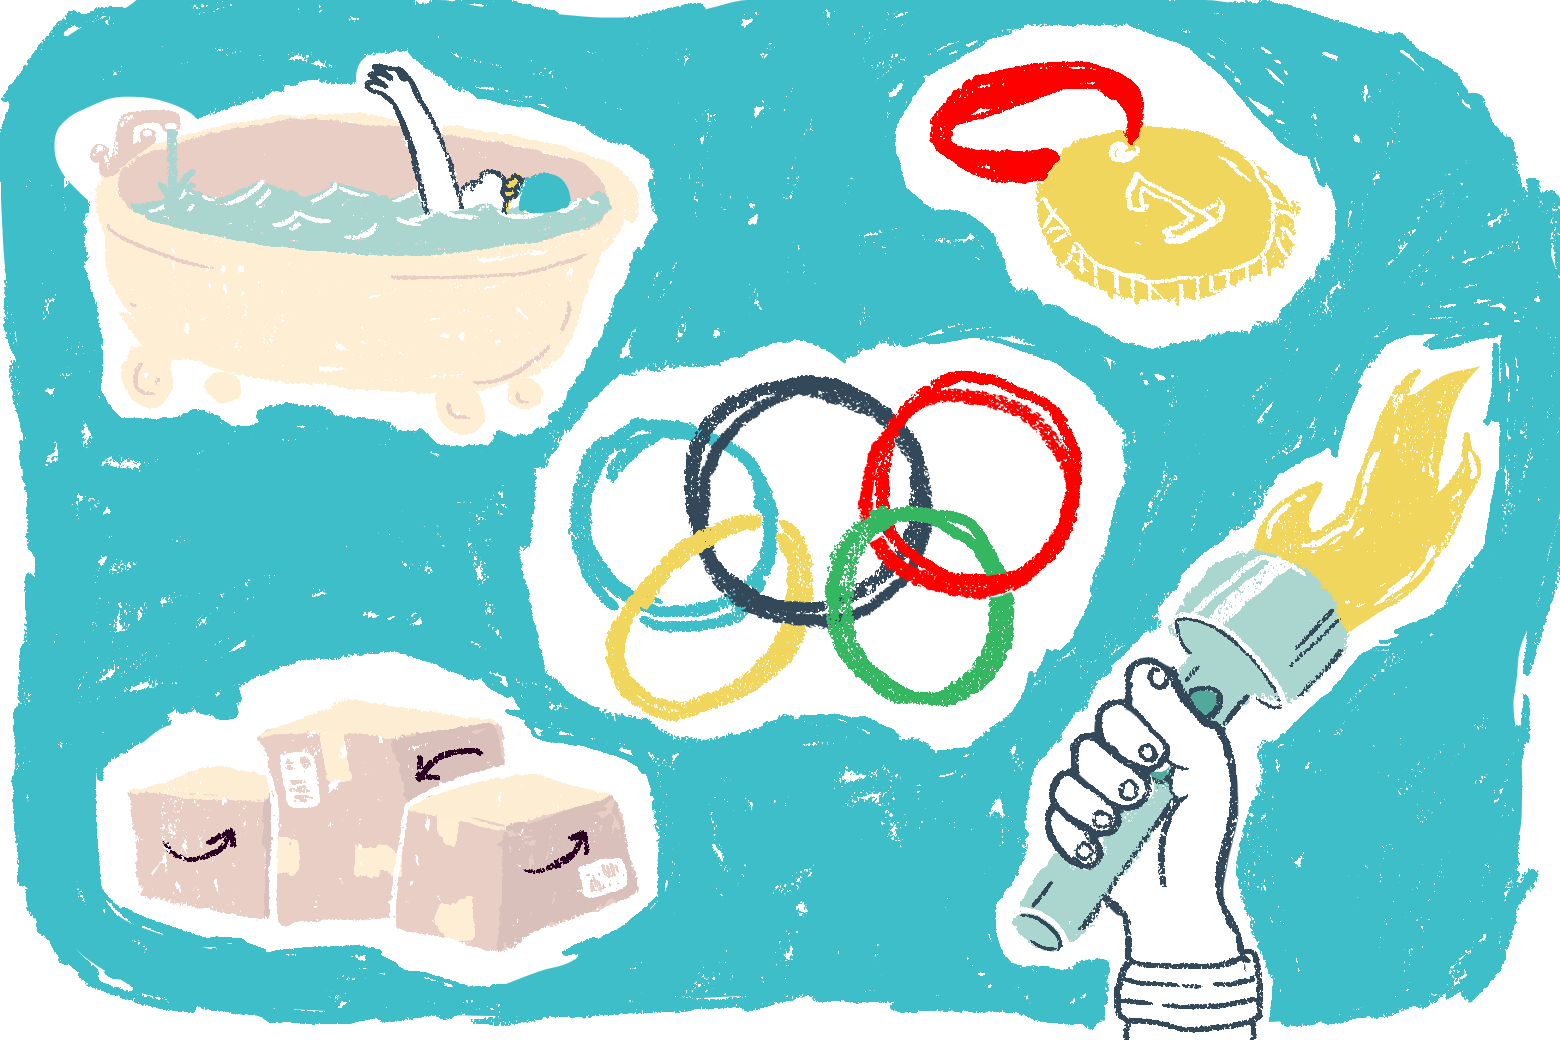 Collage of Olympics images.